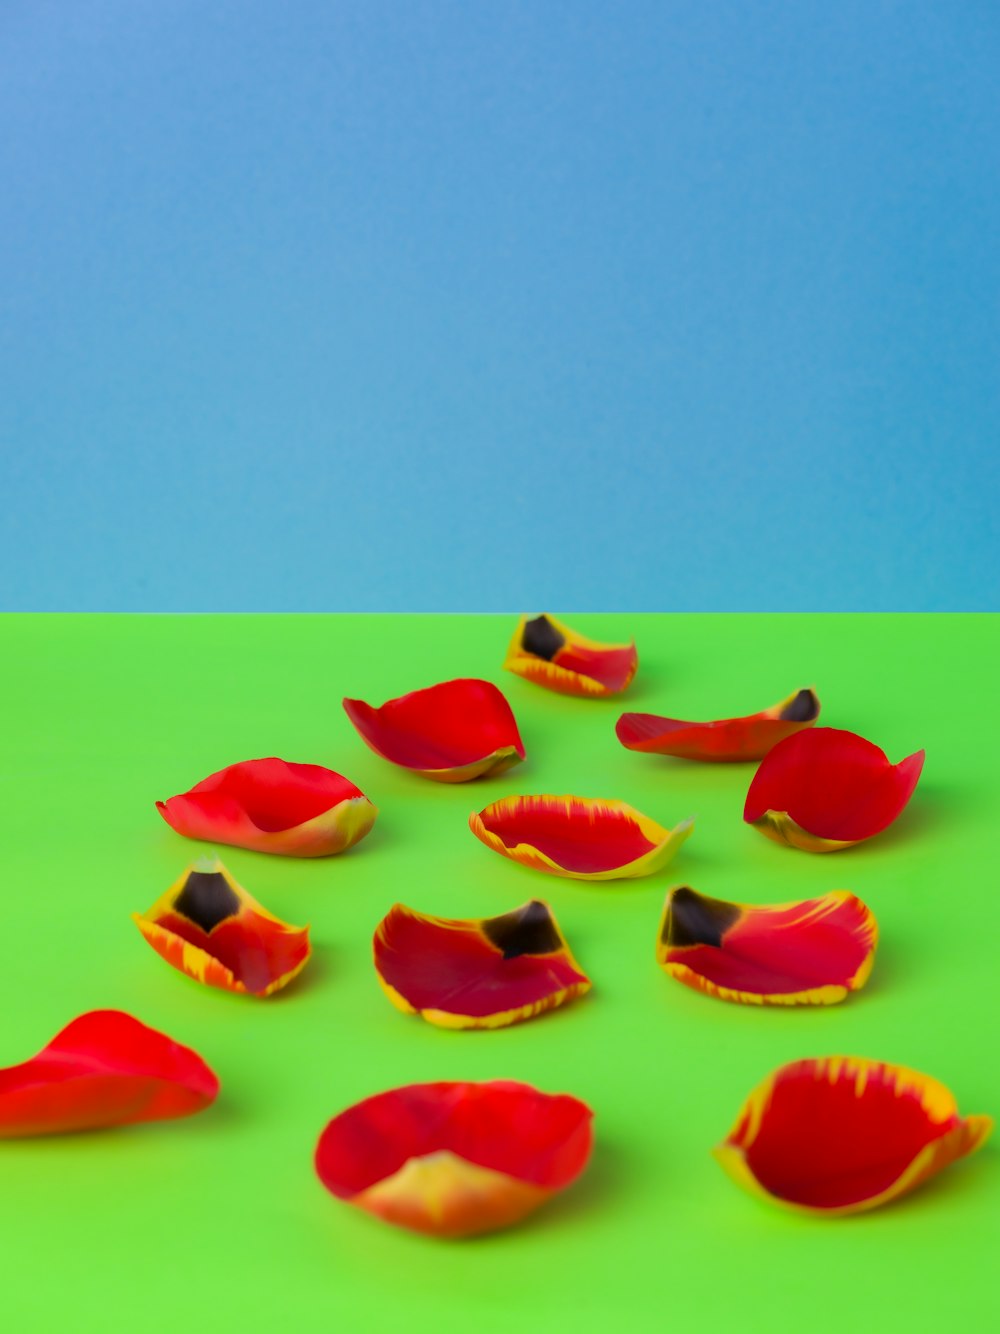 a group of red and yellow petals on a green surface